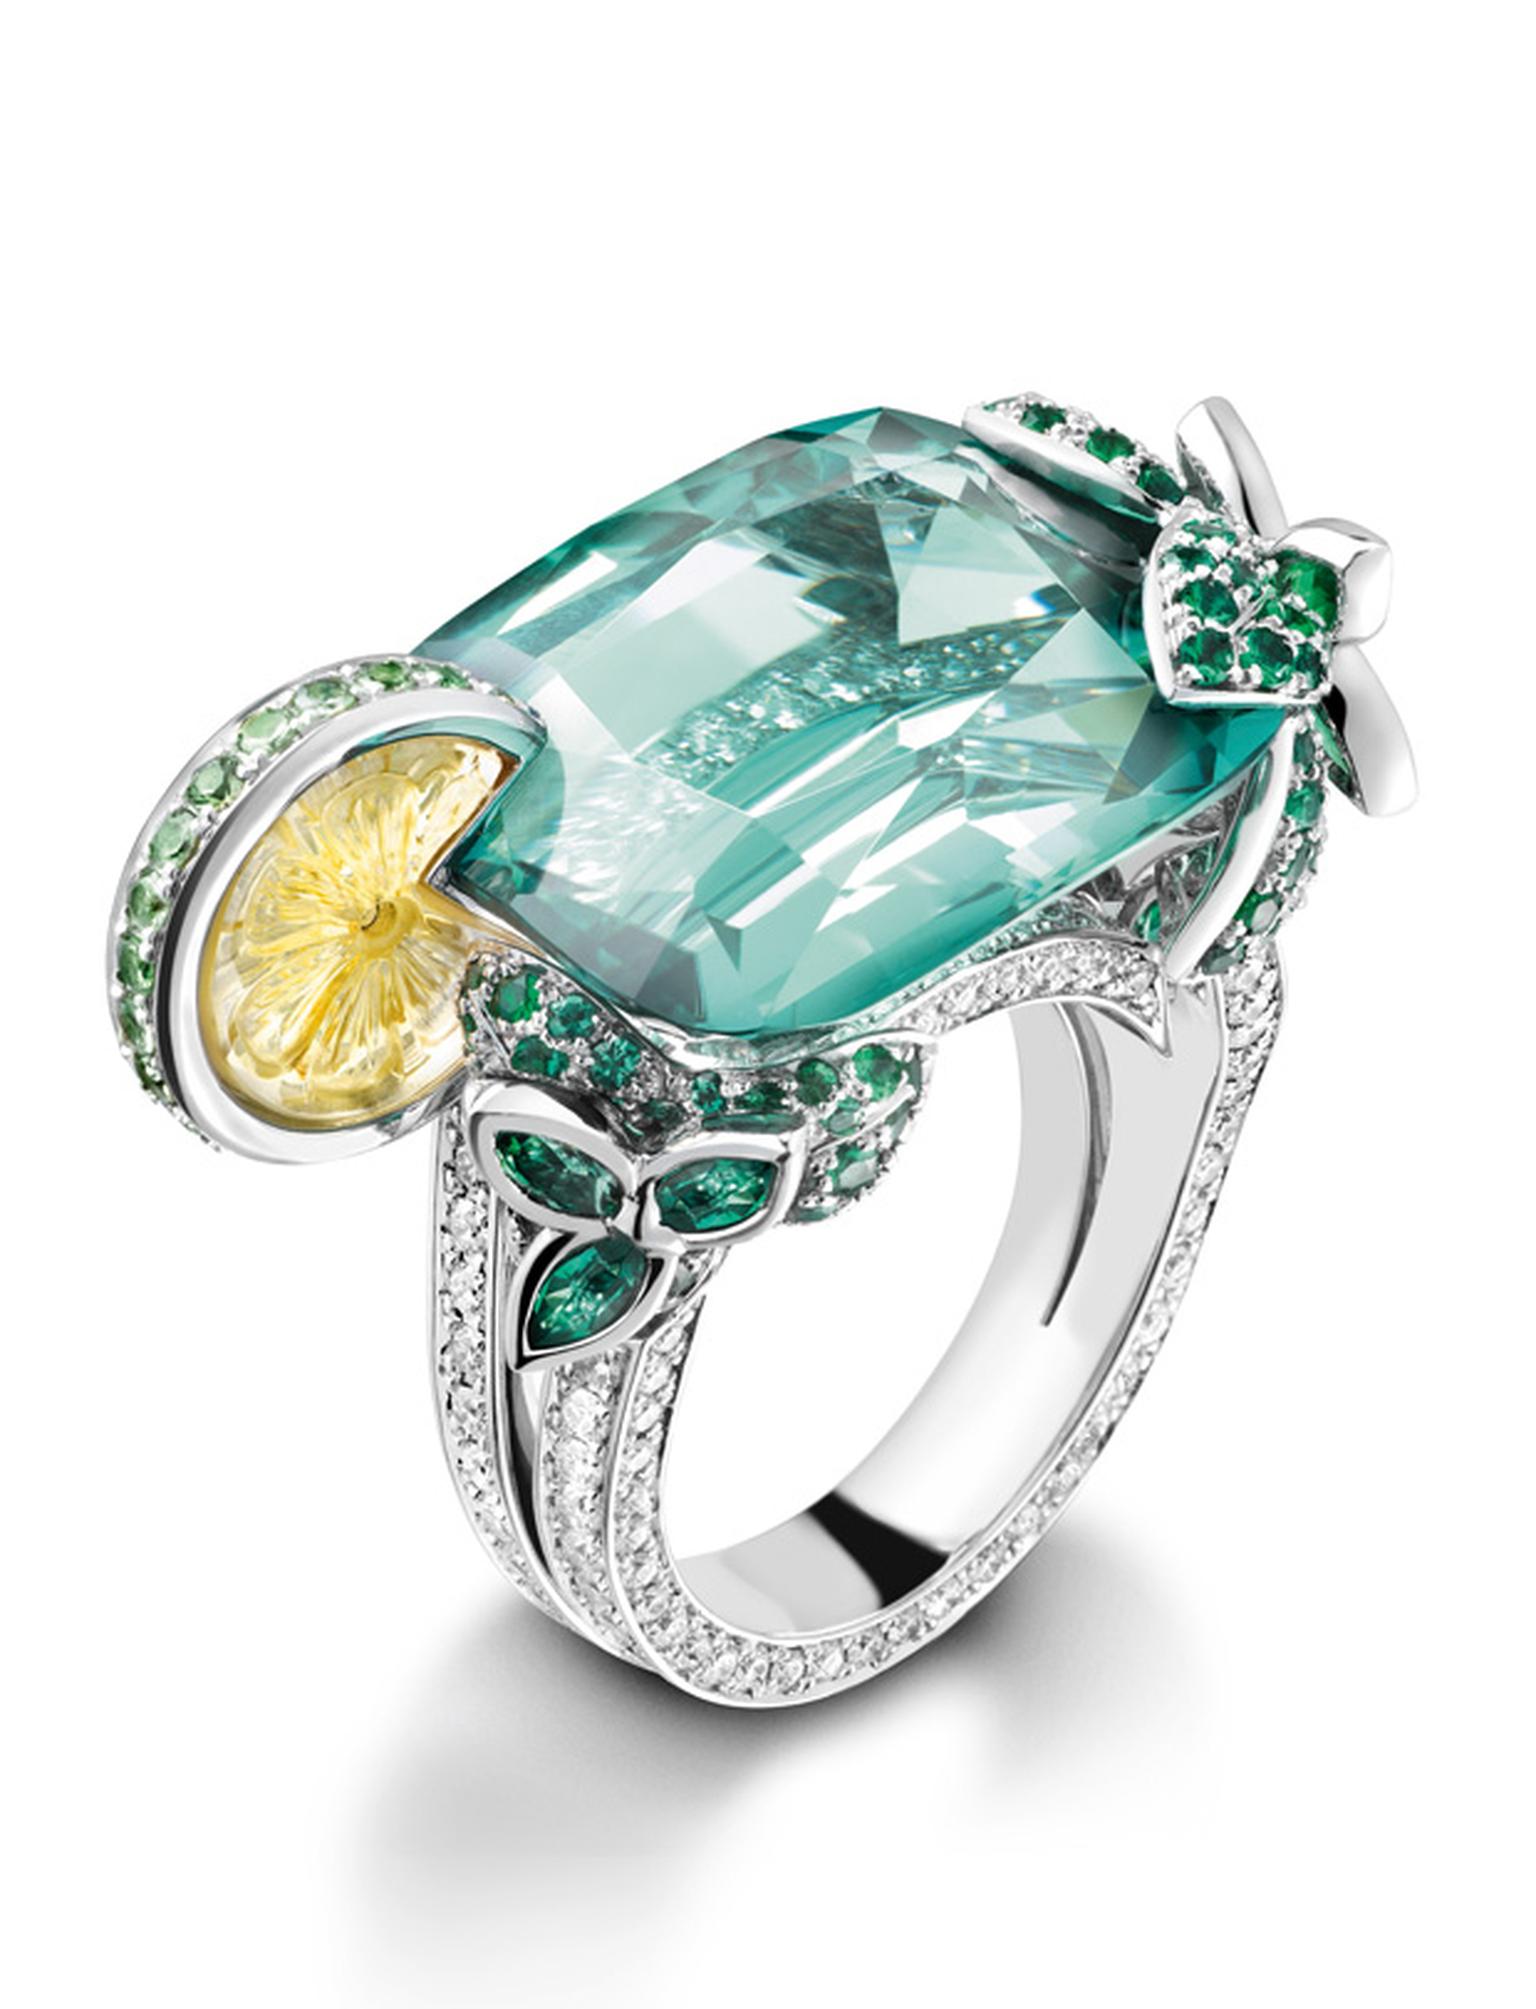 Piaget Mojito inspired cocktail ring with green tourmaline, emeralds and carved citrine